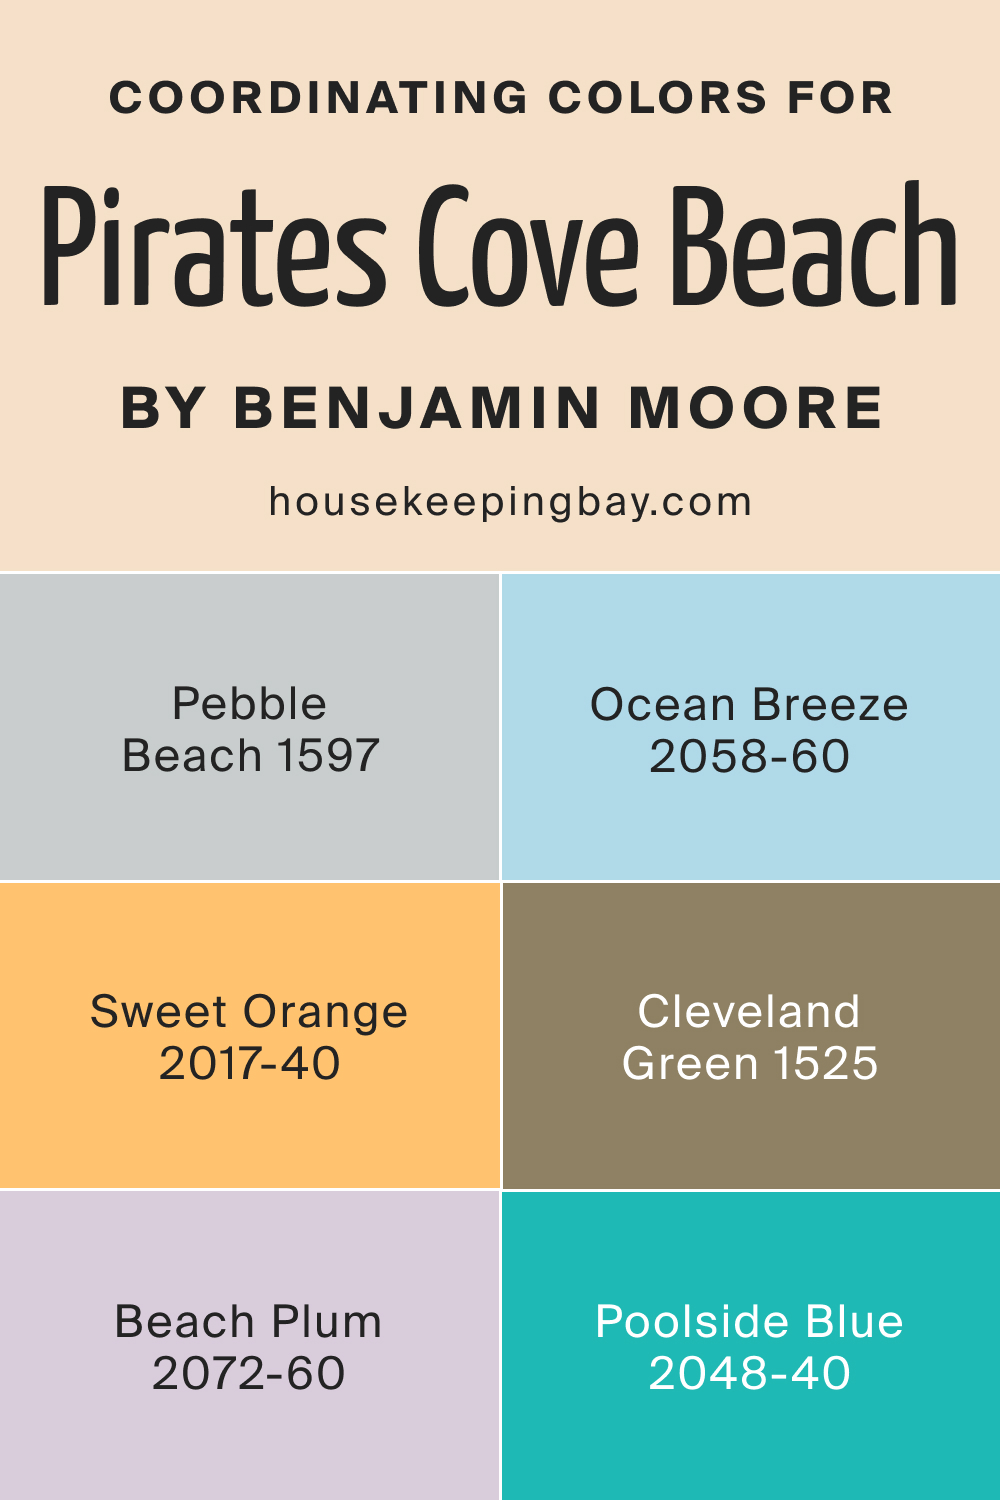 Coordinating Colors for Pirates Cove Beach OC 80 by Benjamin Moore